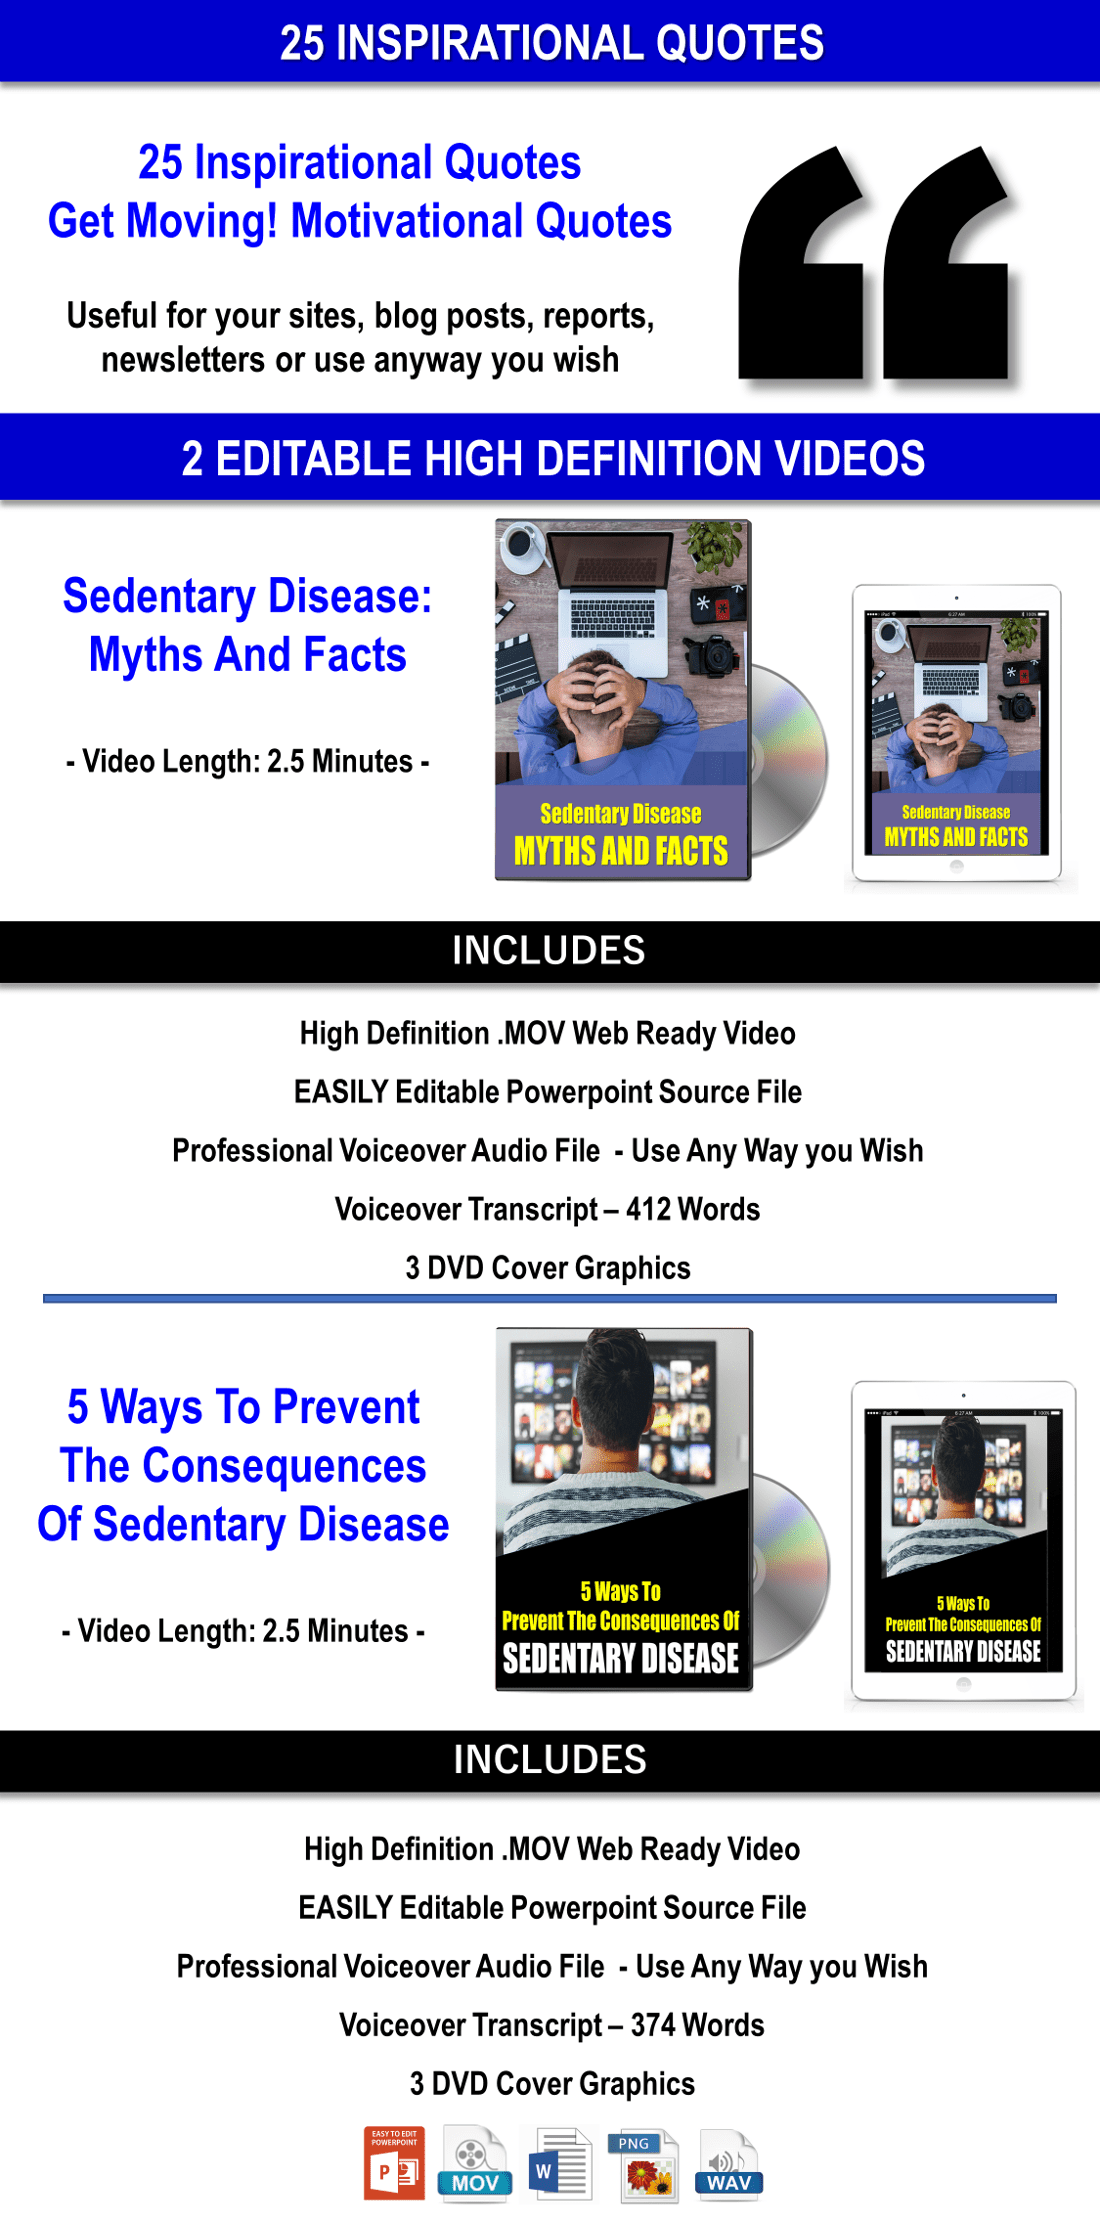 Sedentary Disease Content with PLR Rights